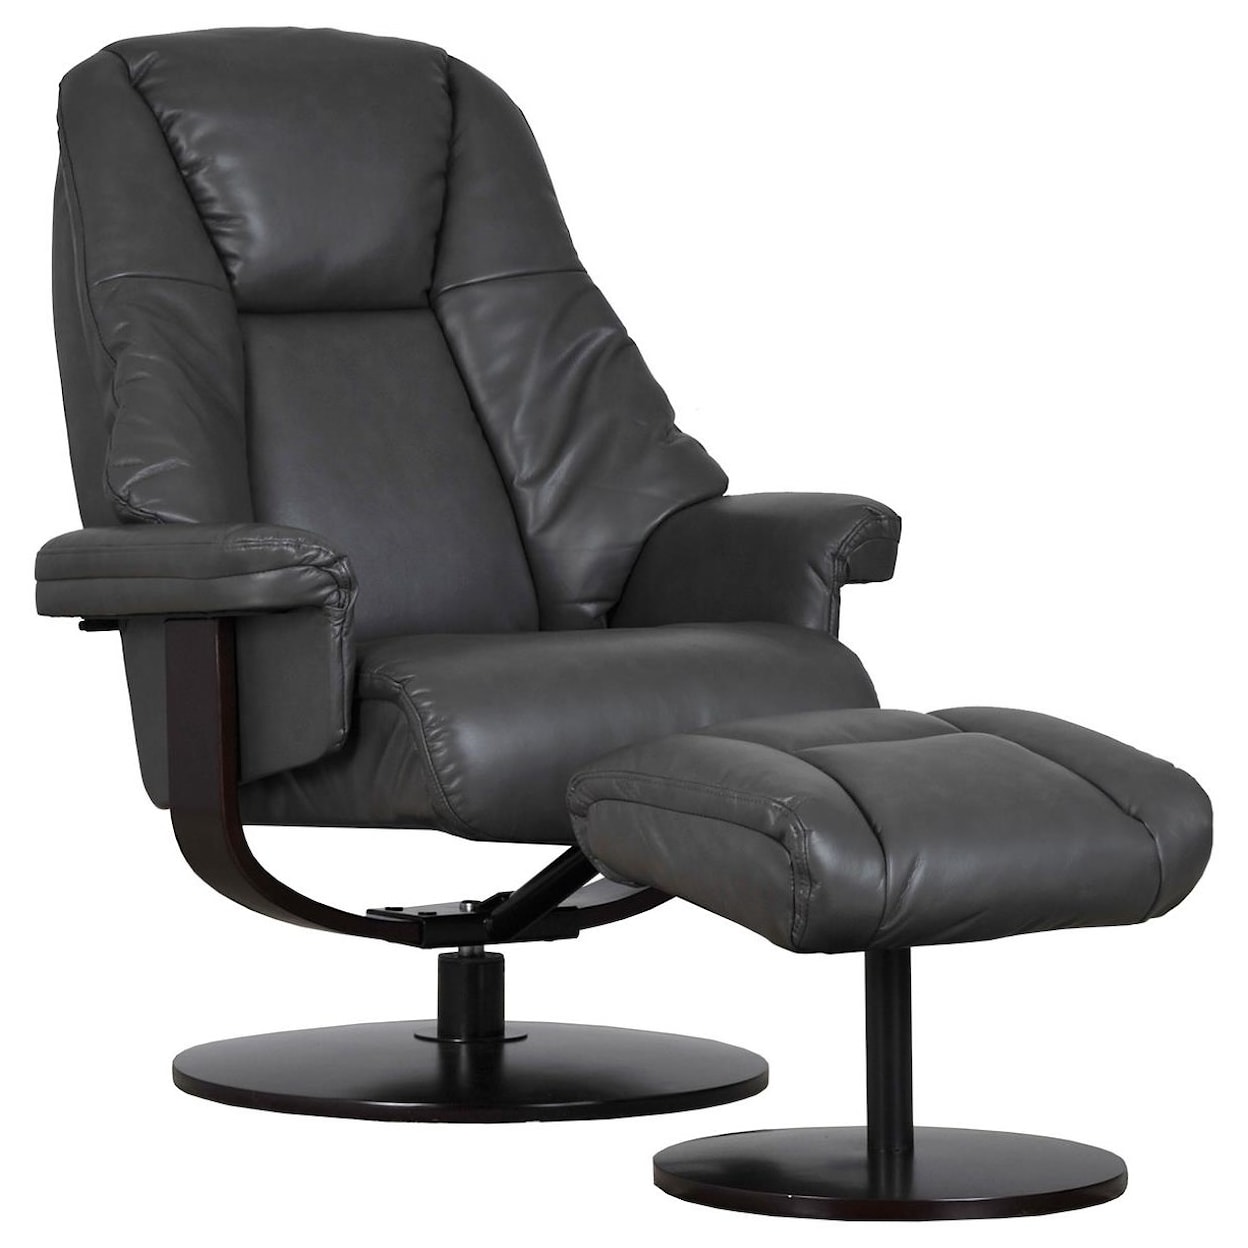 Mac Motion Chairs 14130 Push Back Chair and Ottoman